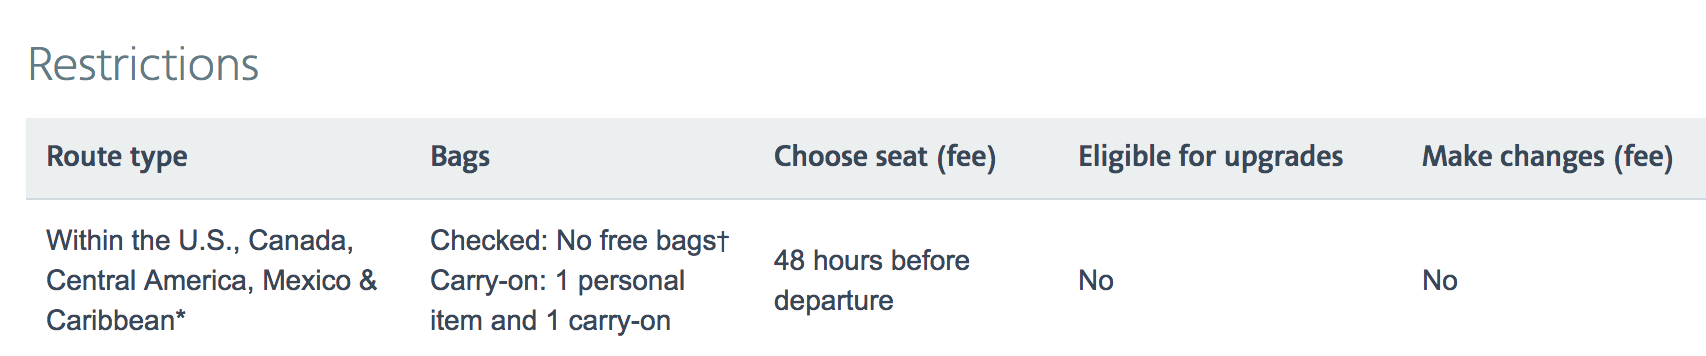 American Airlines clearly states no changes can be made to your basic economy ticket.